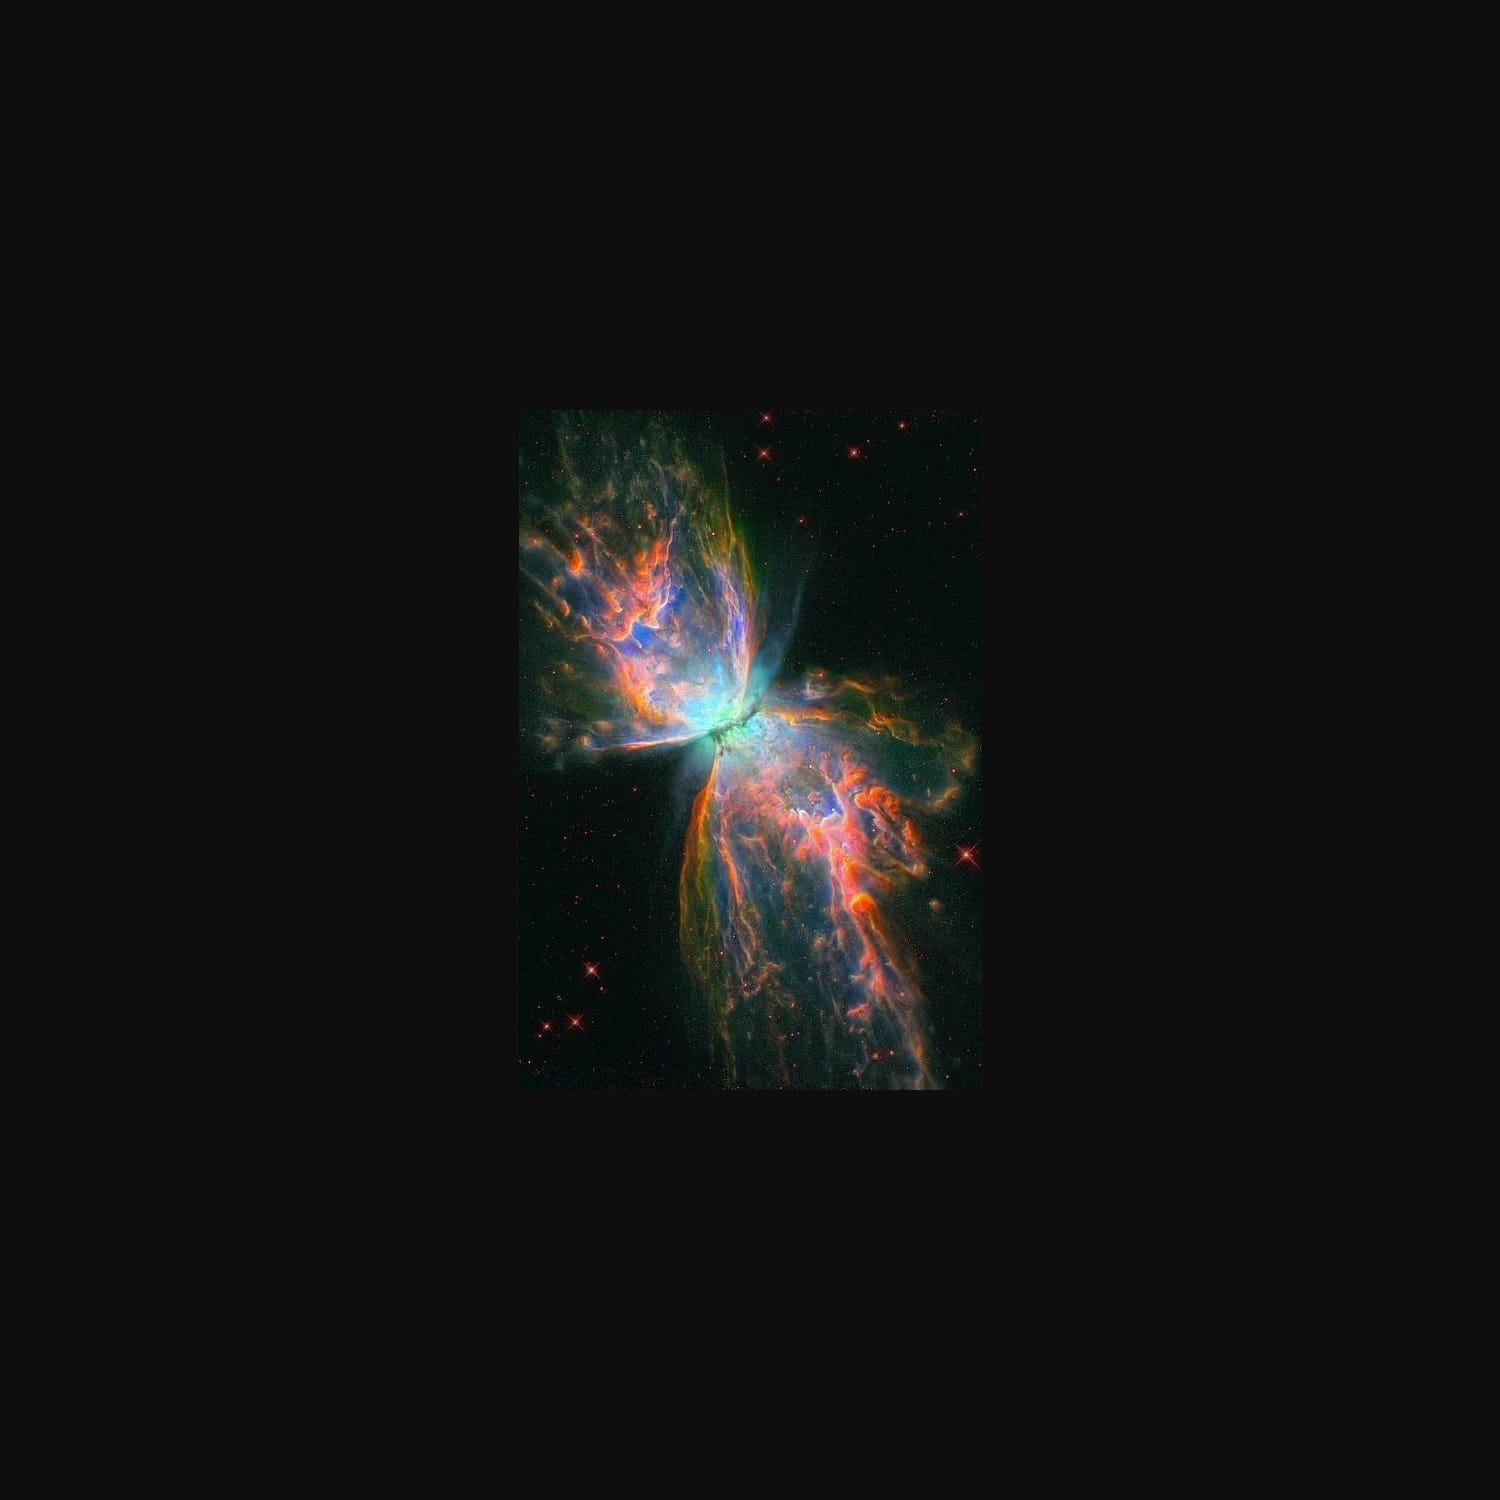 The ‘Butterfly Nebula’ as captured by Hubble: Apparently, scientists believe that in the center there are 2 stars orbiting each other